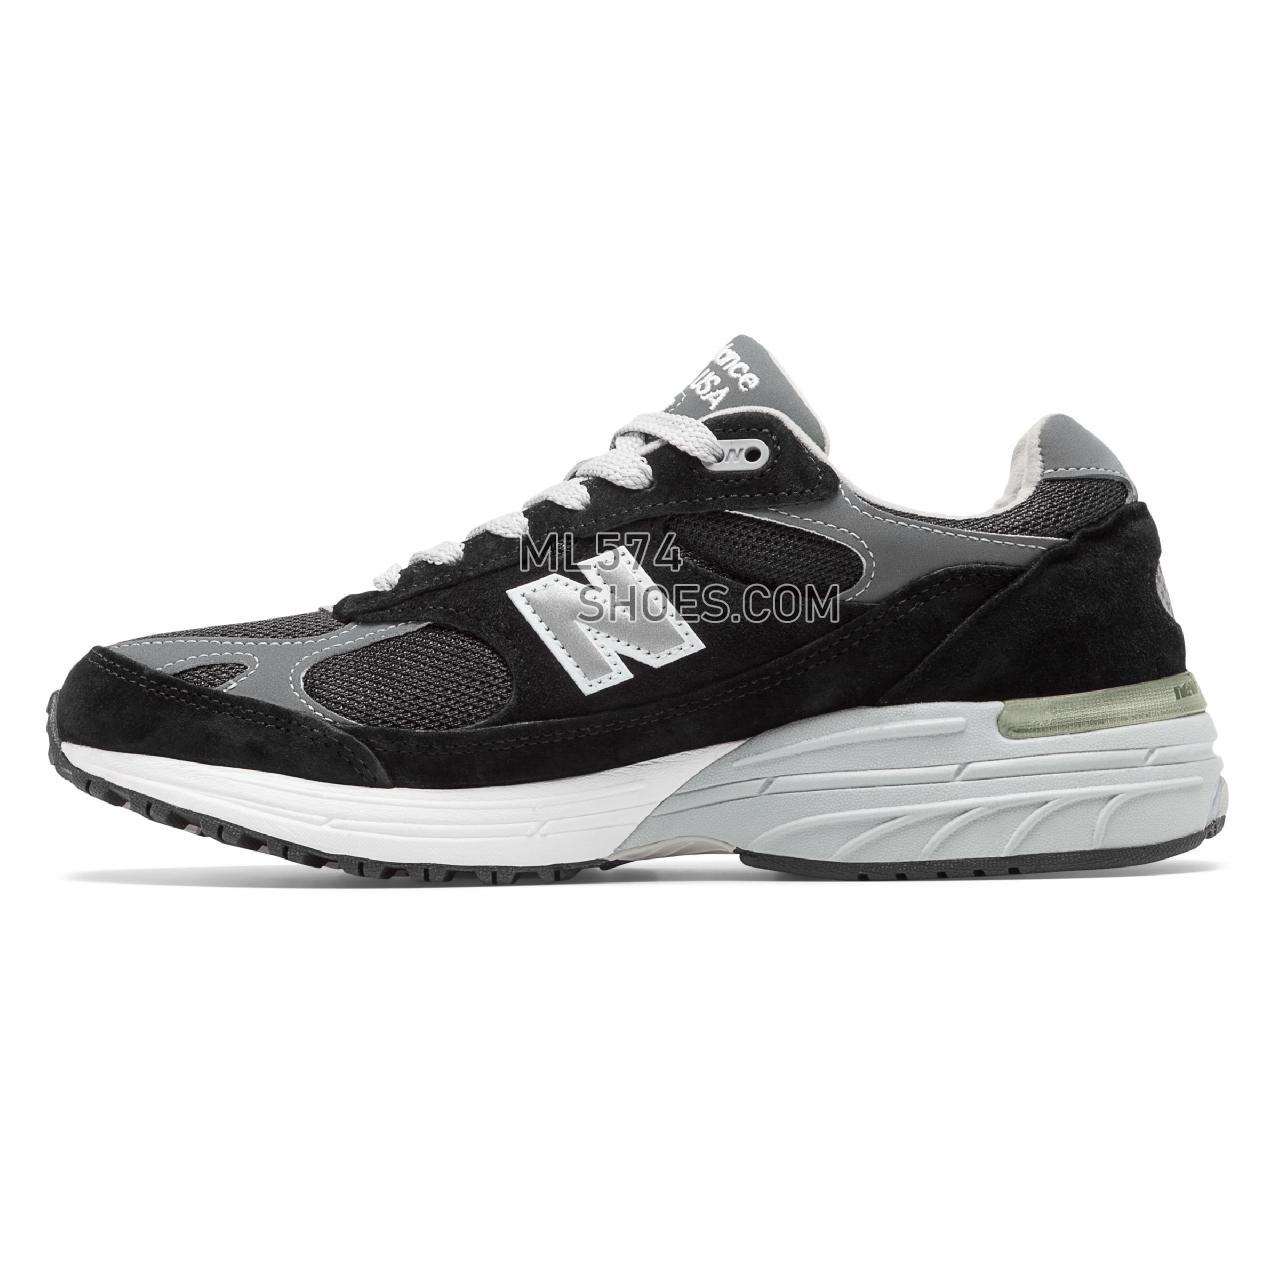 New Balance Made in US 993 - Women's Neutral Running - Black with Grey - WR993BK